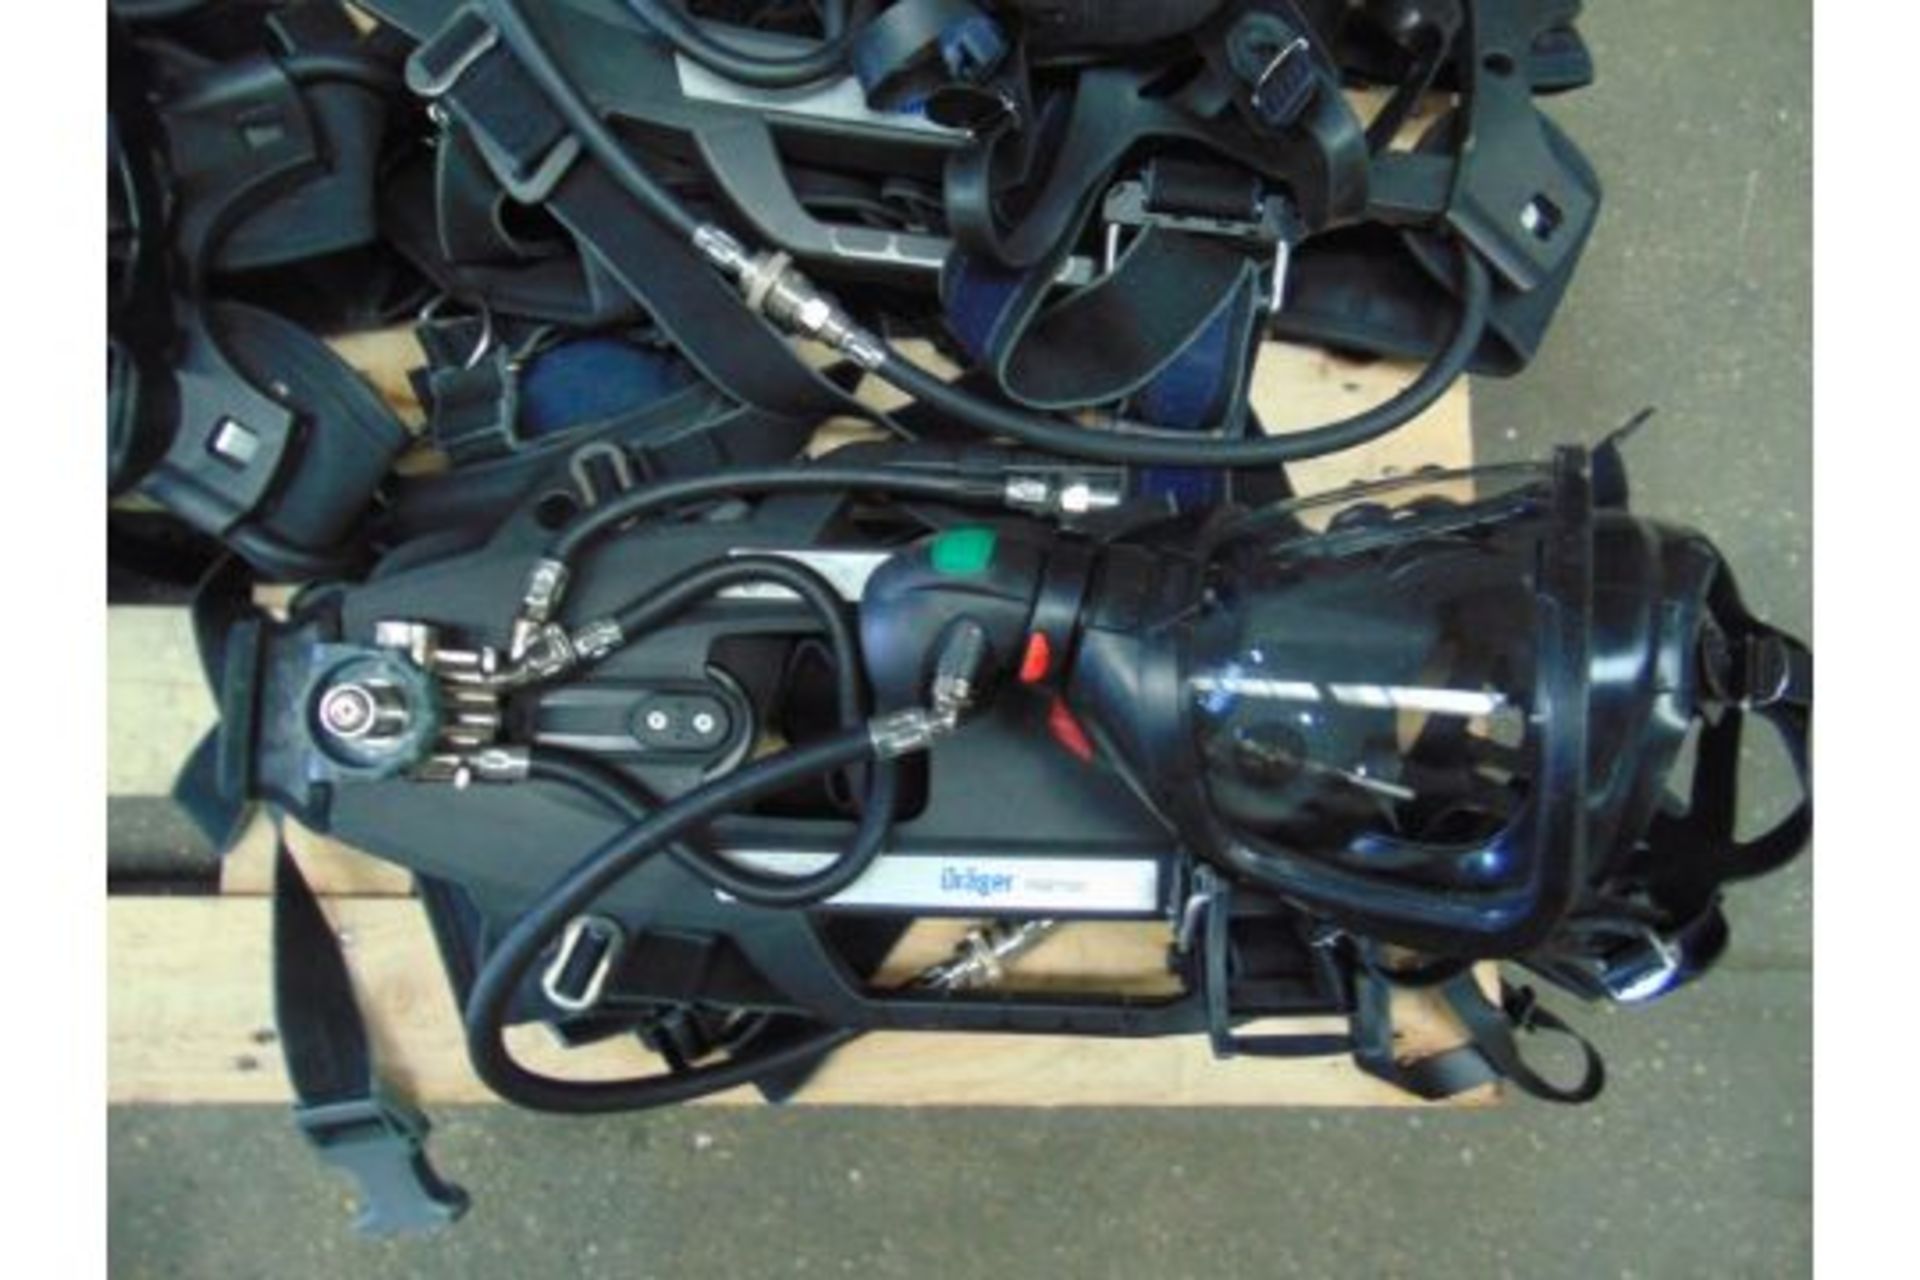 5 x Drager PSS 7000 Self Contained Breathing Apparatus w/ 10 x Drager 300 Bar Air Cylinders - Image 13 of 27